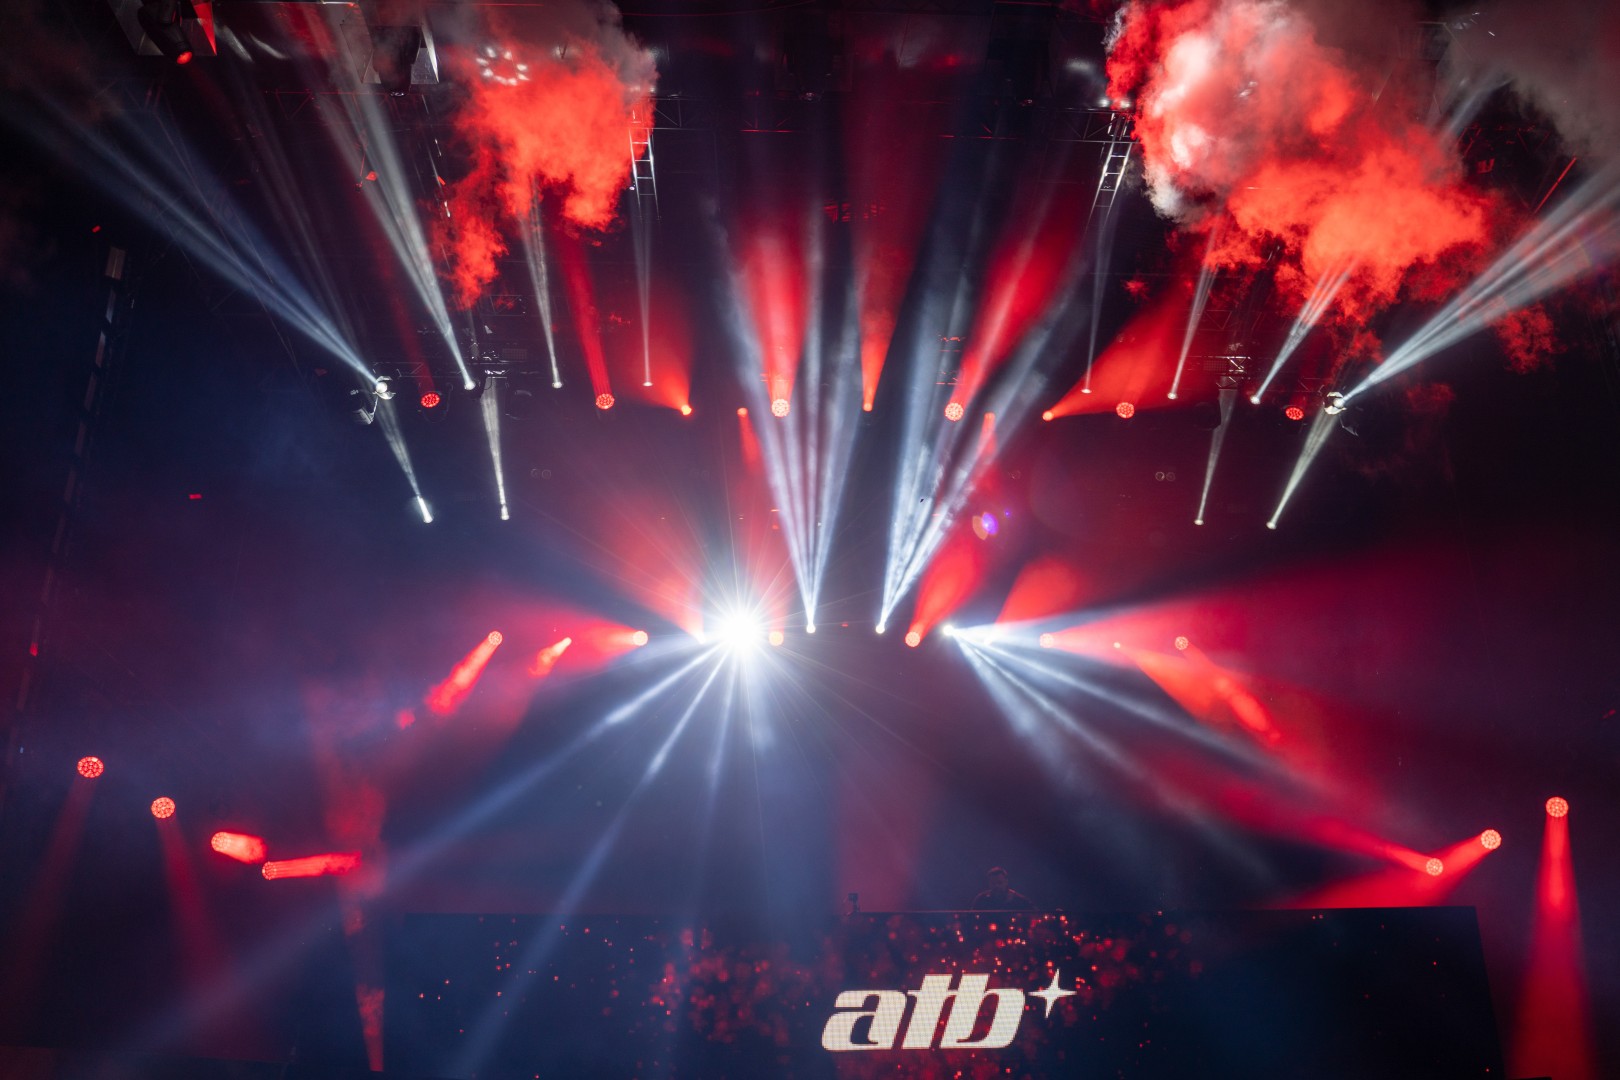 ATB at Cluj Arena in Cluj-Napoca on August 8, 2022 (054885657c)